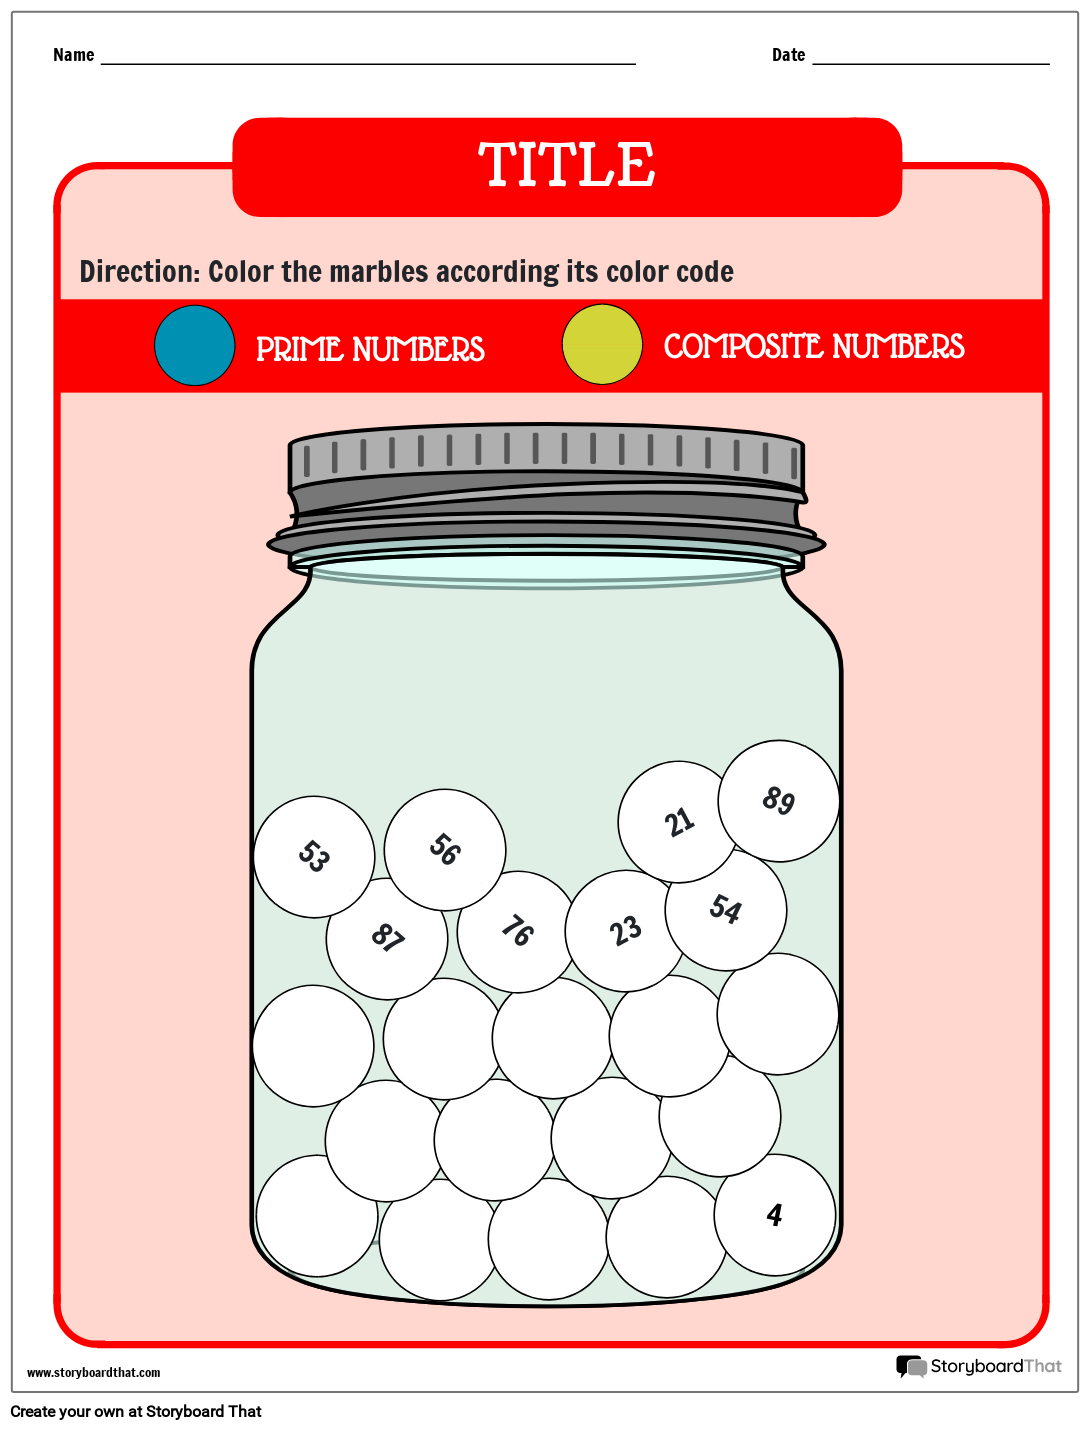 Marbles-Themed Prime and Composite Number Worksheet